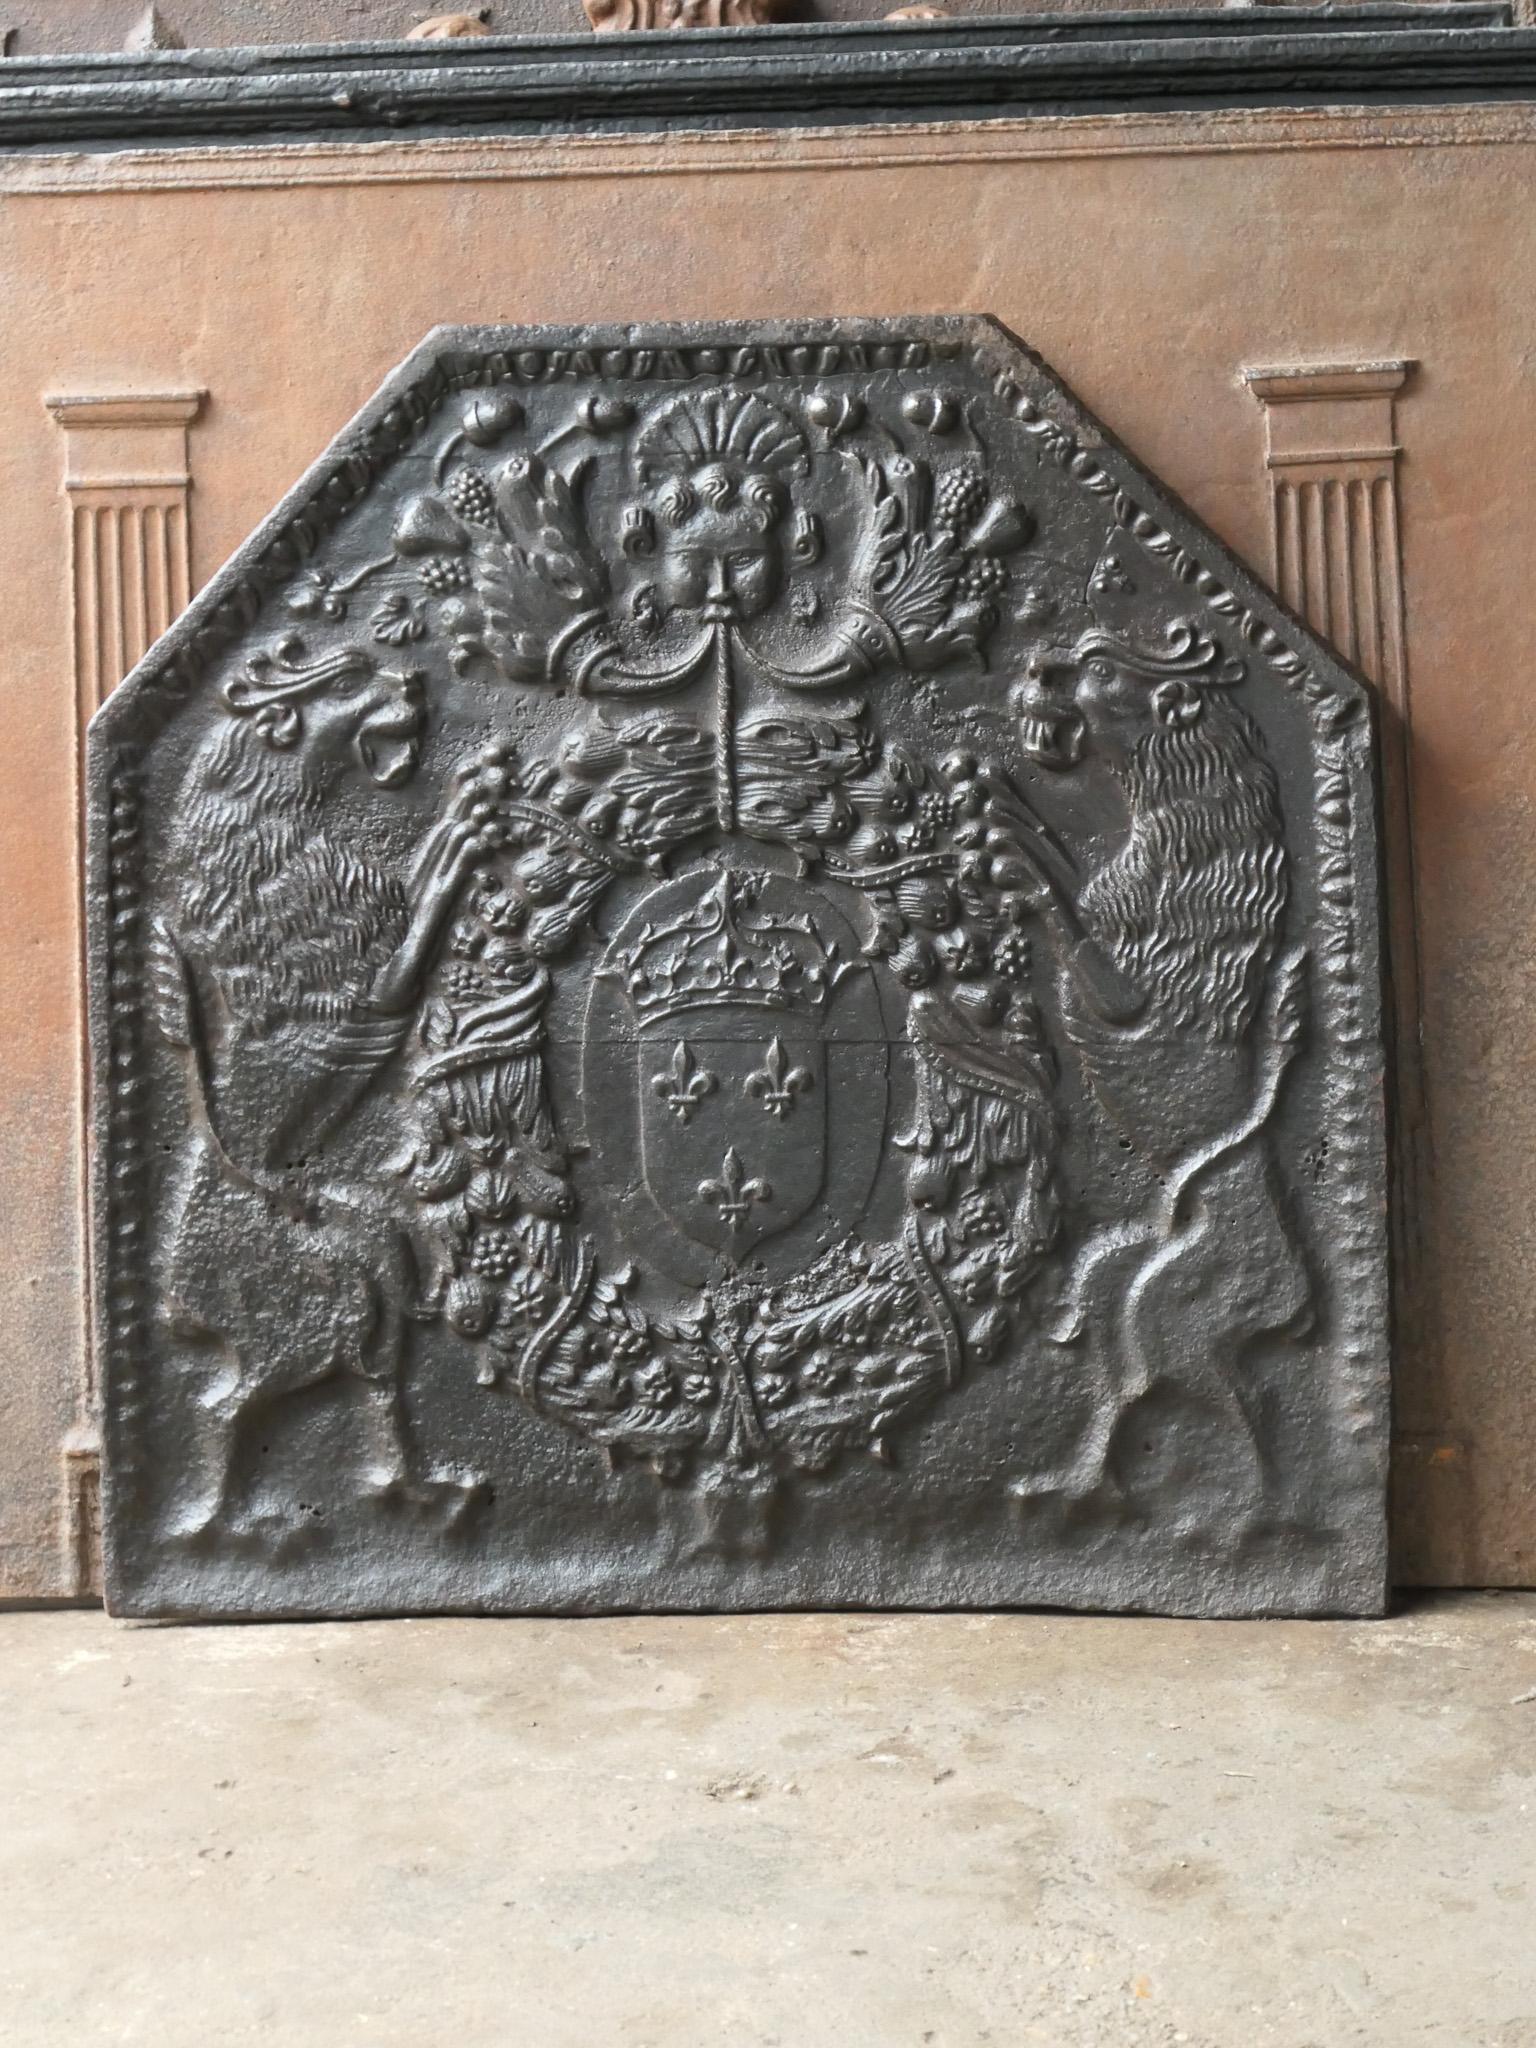 Beautiful 17th century French Louis XIII fireback with a version of the arms of France. This is the coat of arms of the House of Bourbon, an originally French royal house that became a major dynasty in Europe. It delivered kings for Spain (Navarra),